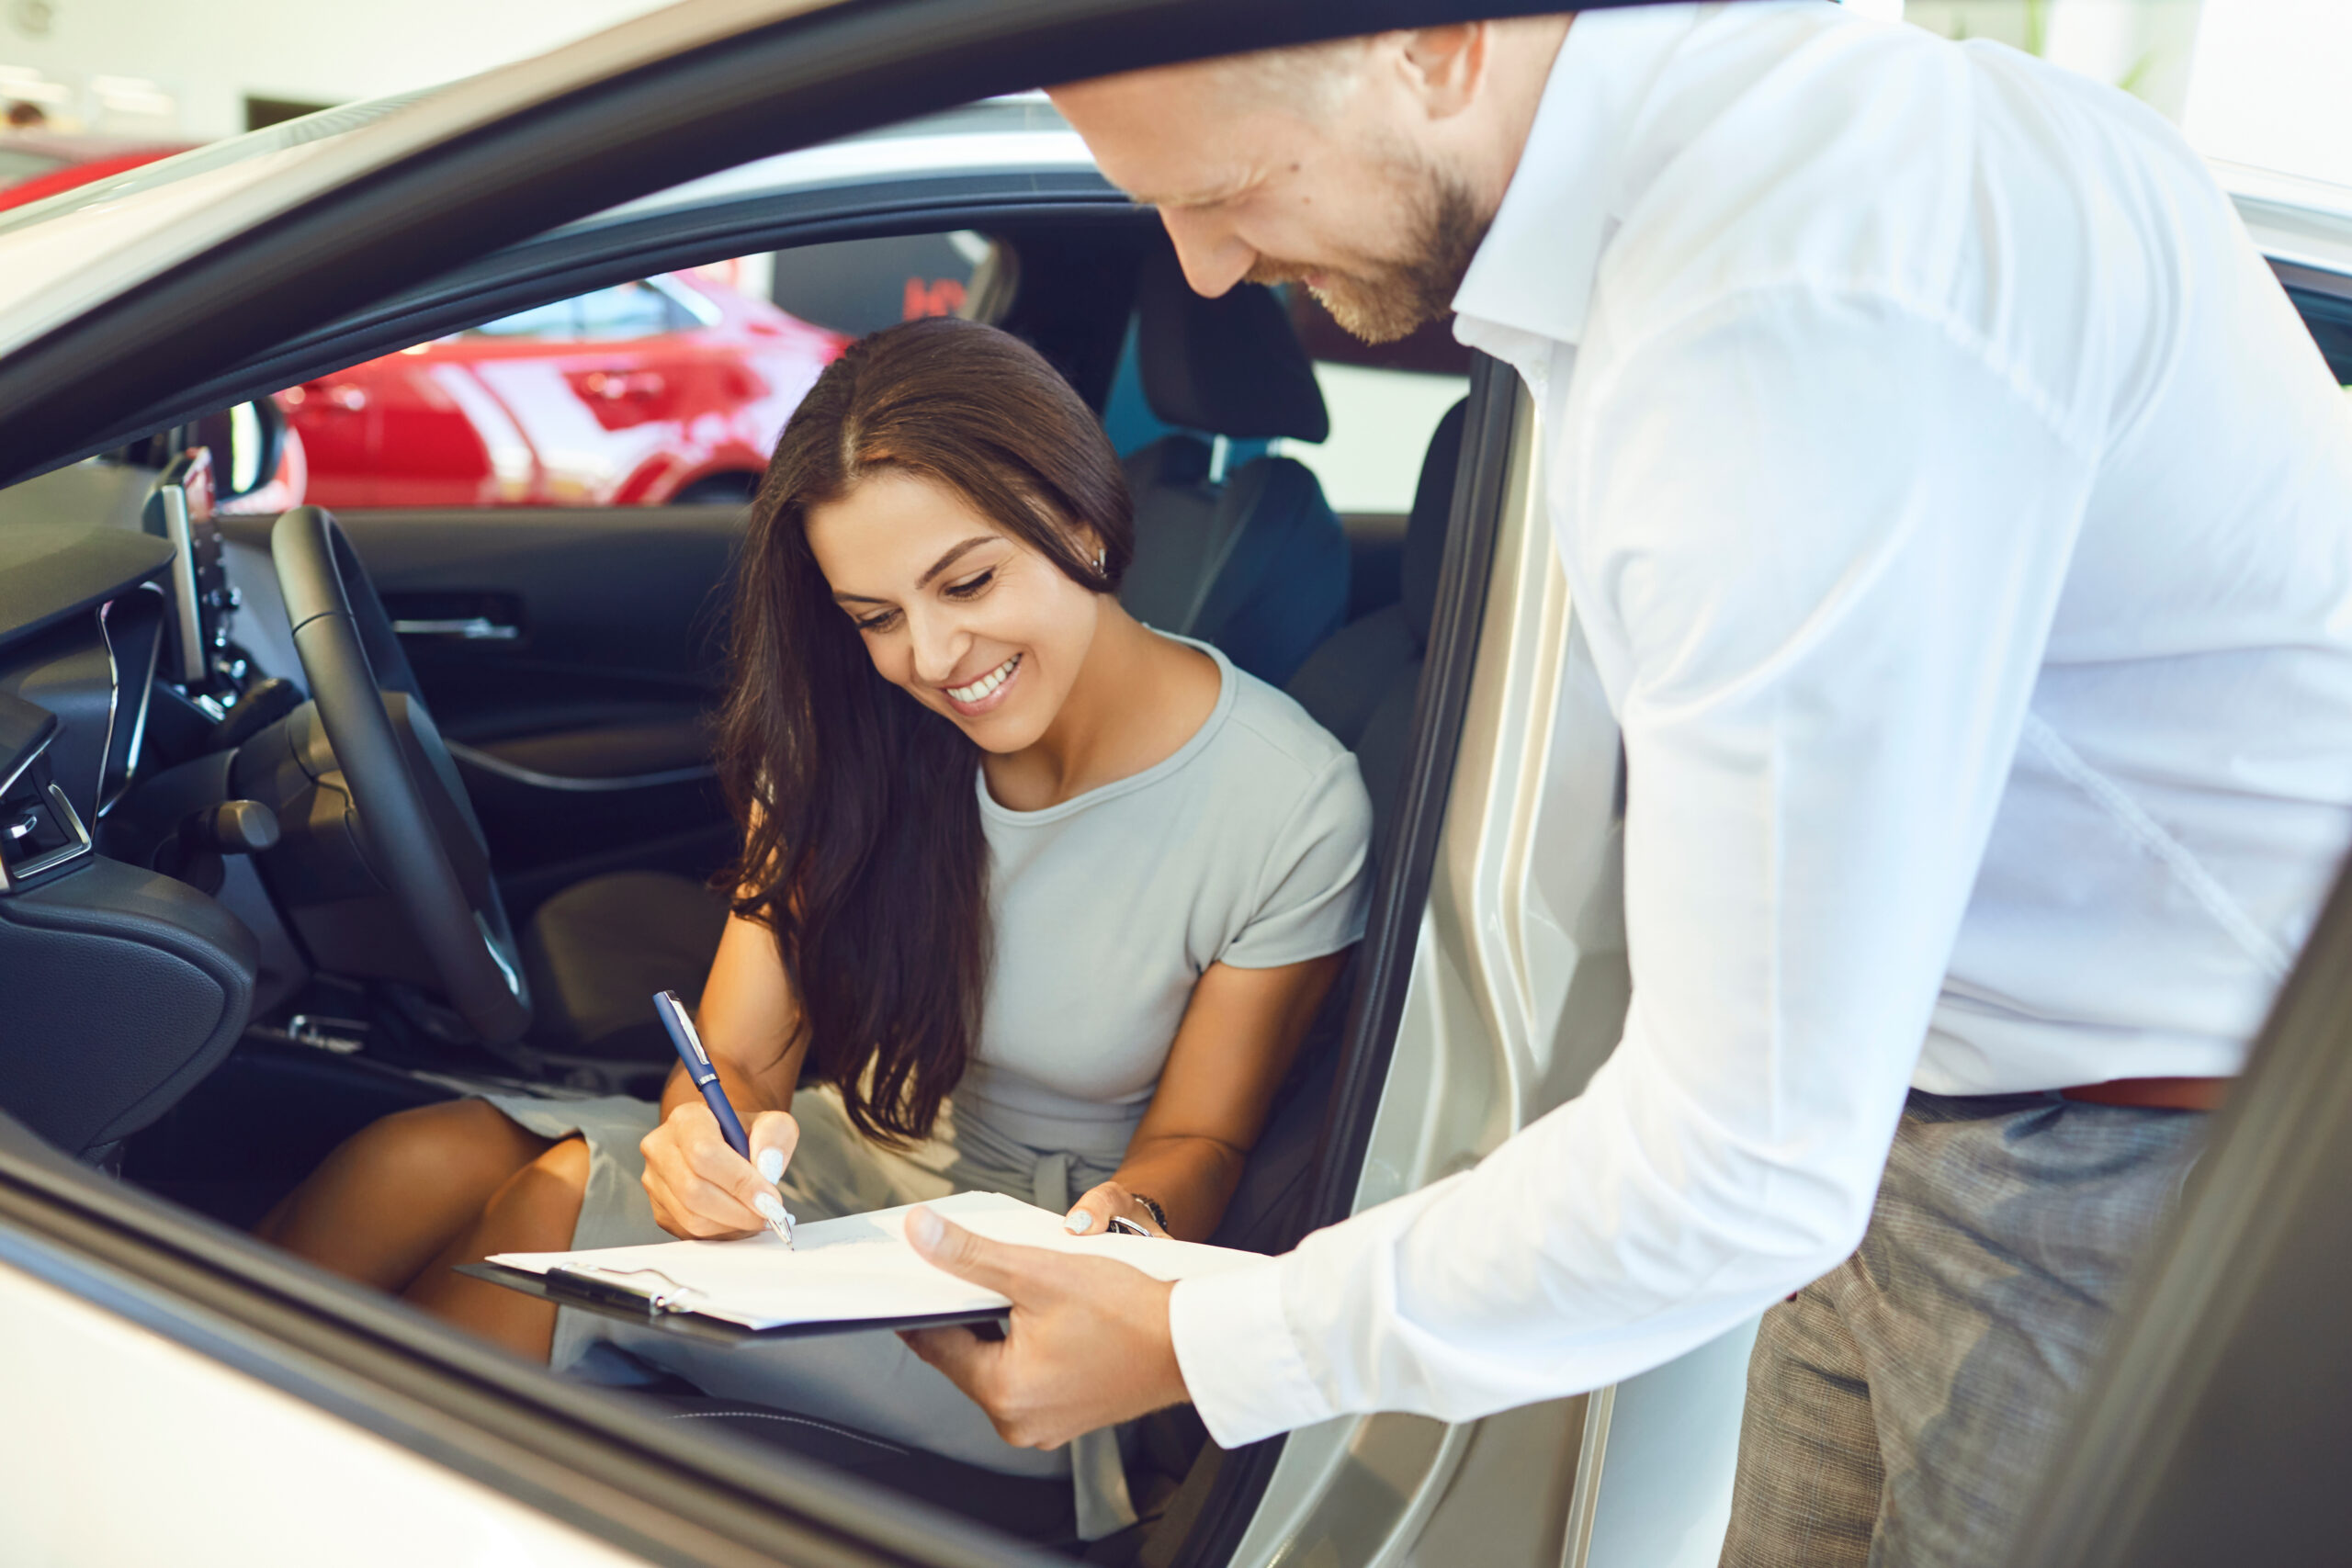 A young woman happily signing a car lease agreement